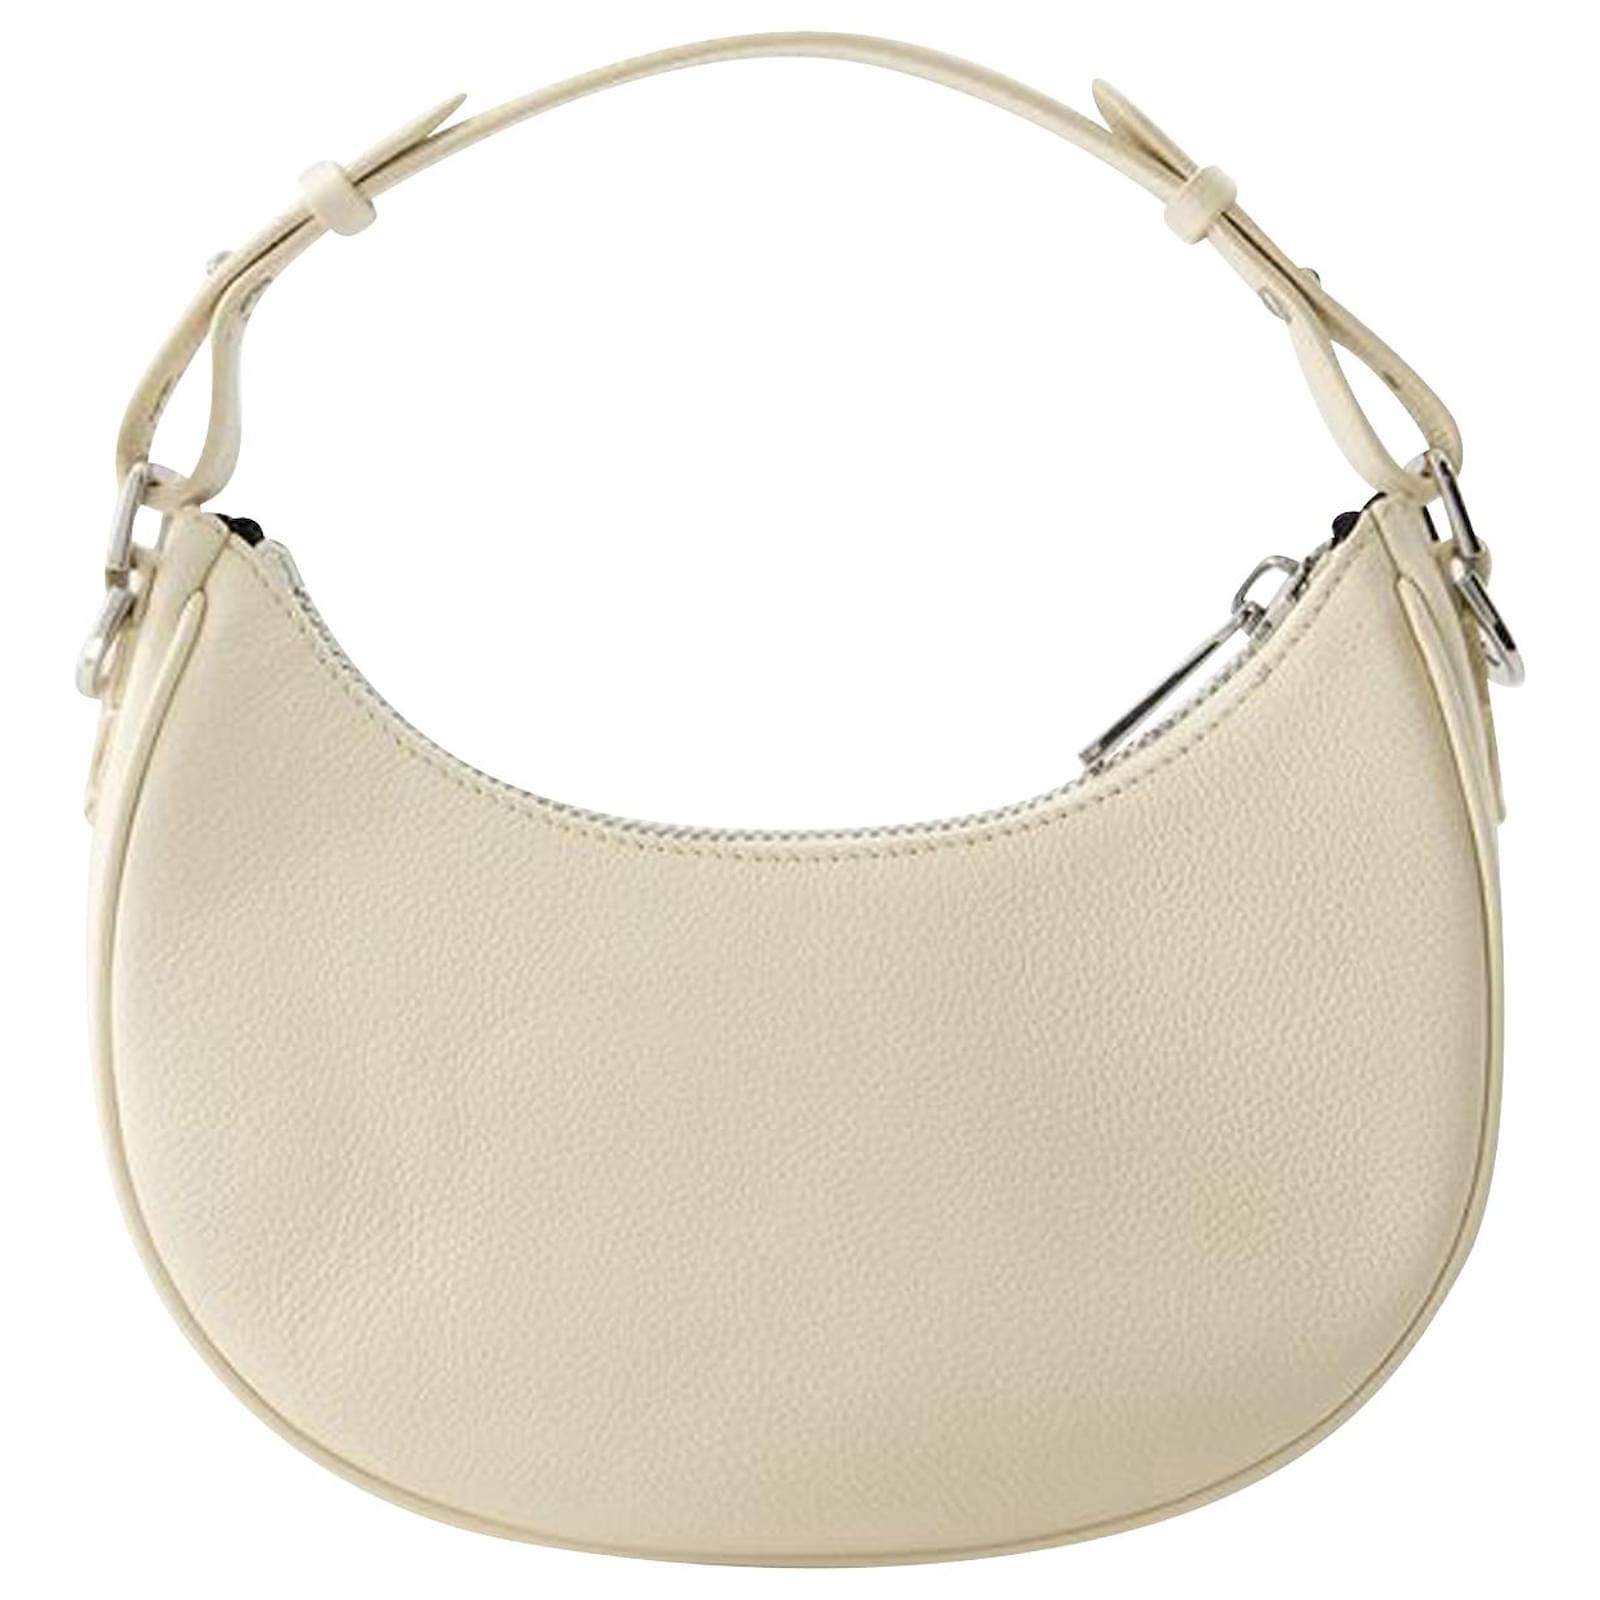 Moonrock Grained Hobo Bag - Zadig & Voltaire - Leather - White Pony ...